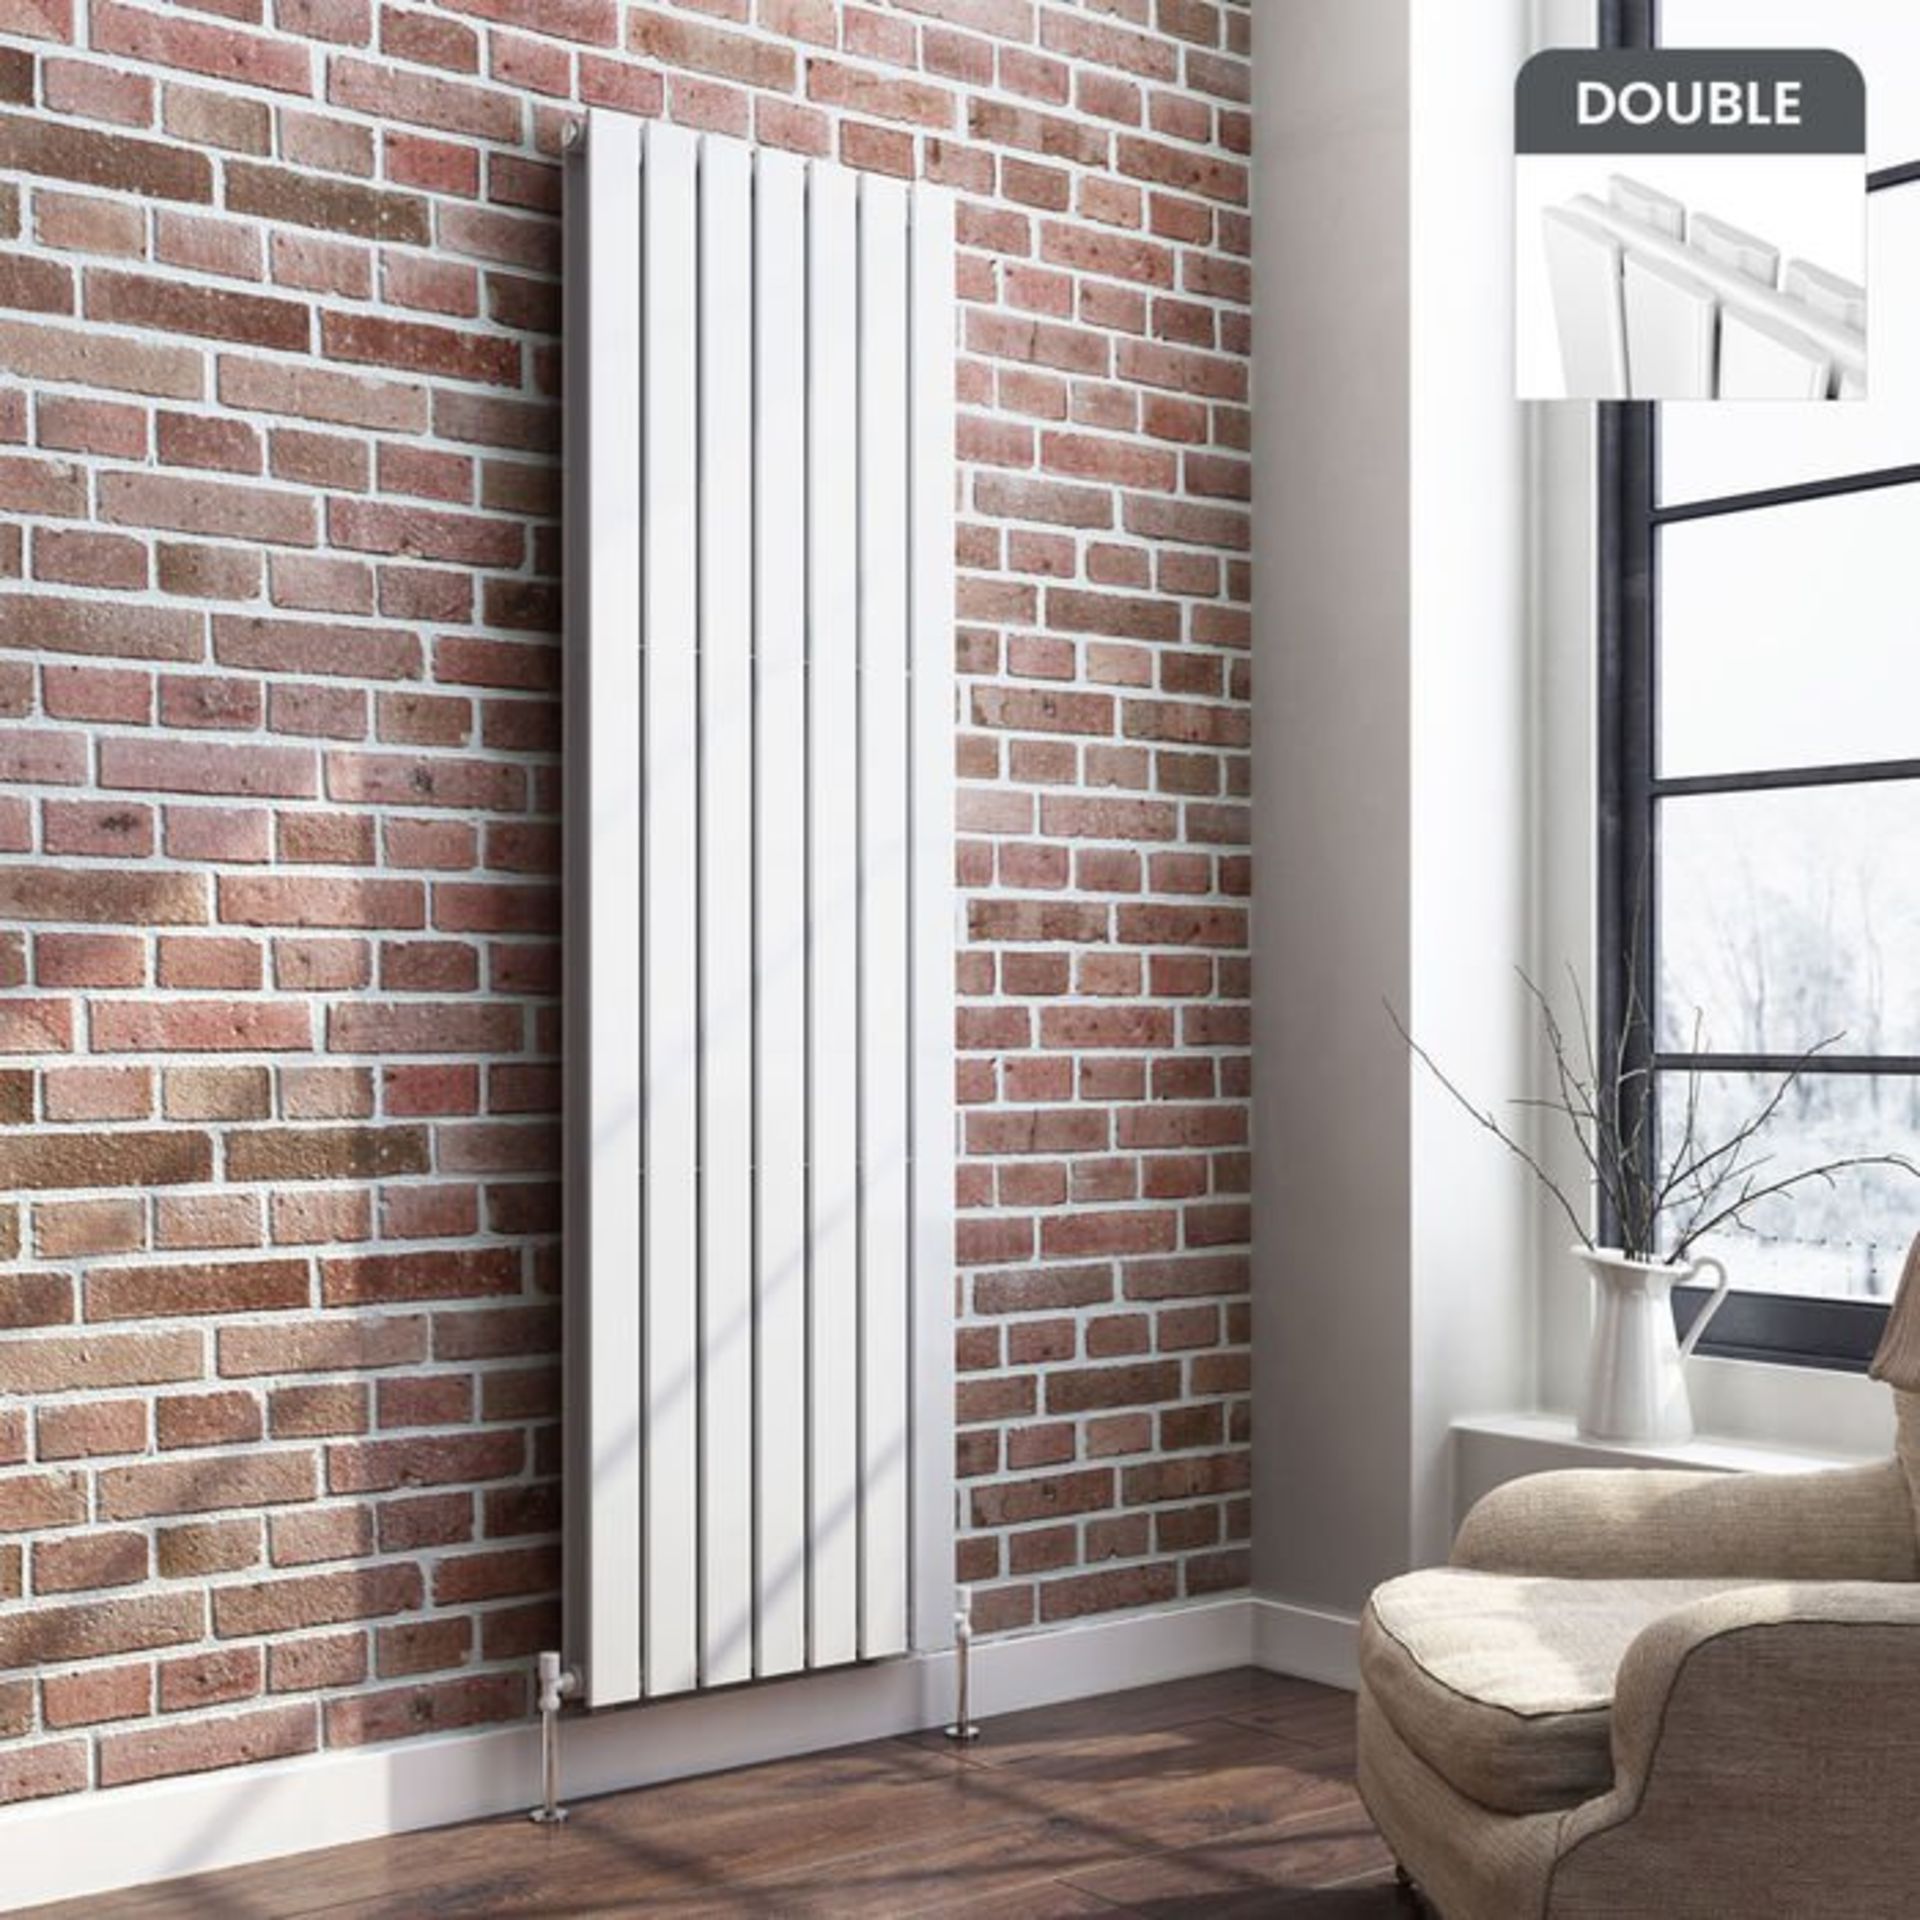 (S67) 1800x532mm Gloss White Double Flat Panel Vertical Radiator RRP £599.99 Low carbon steel,